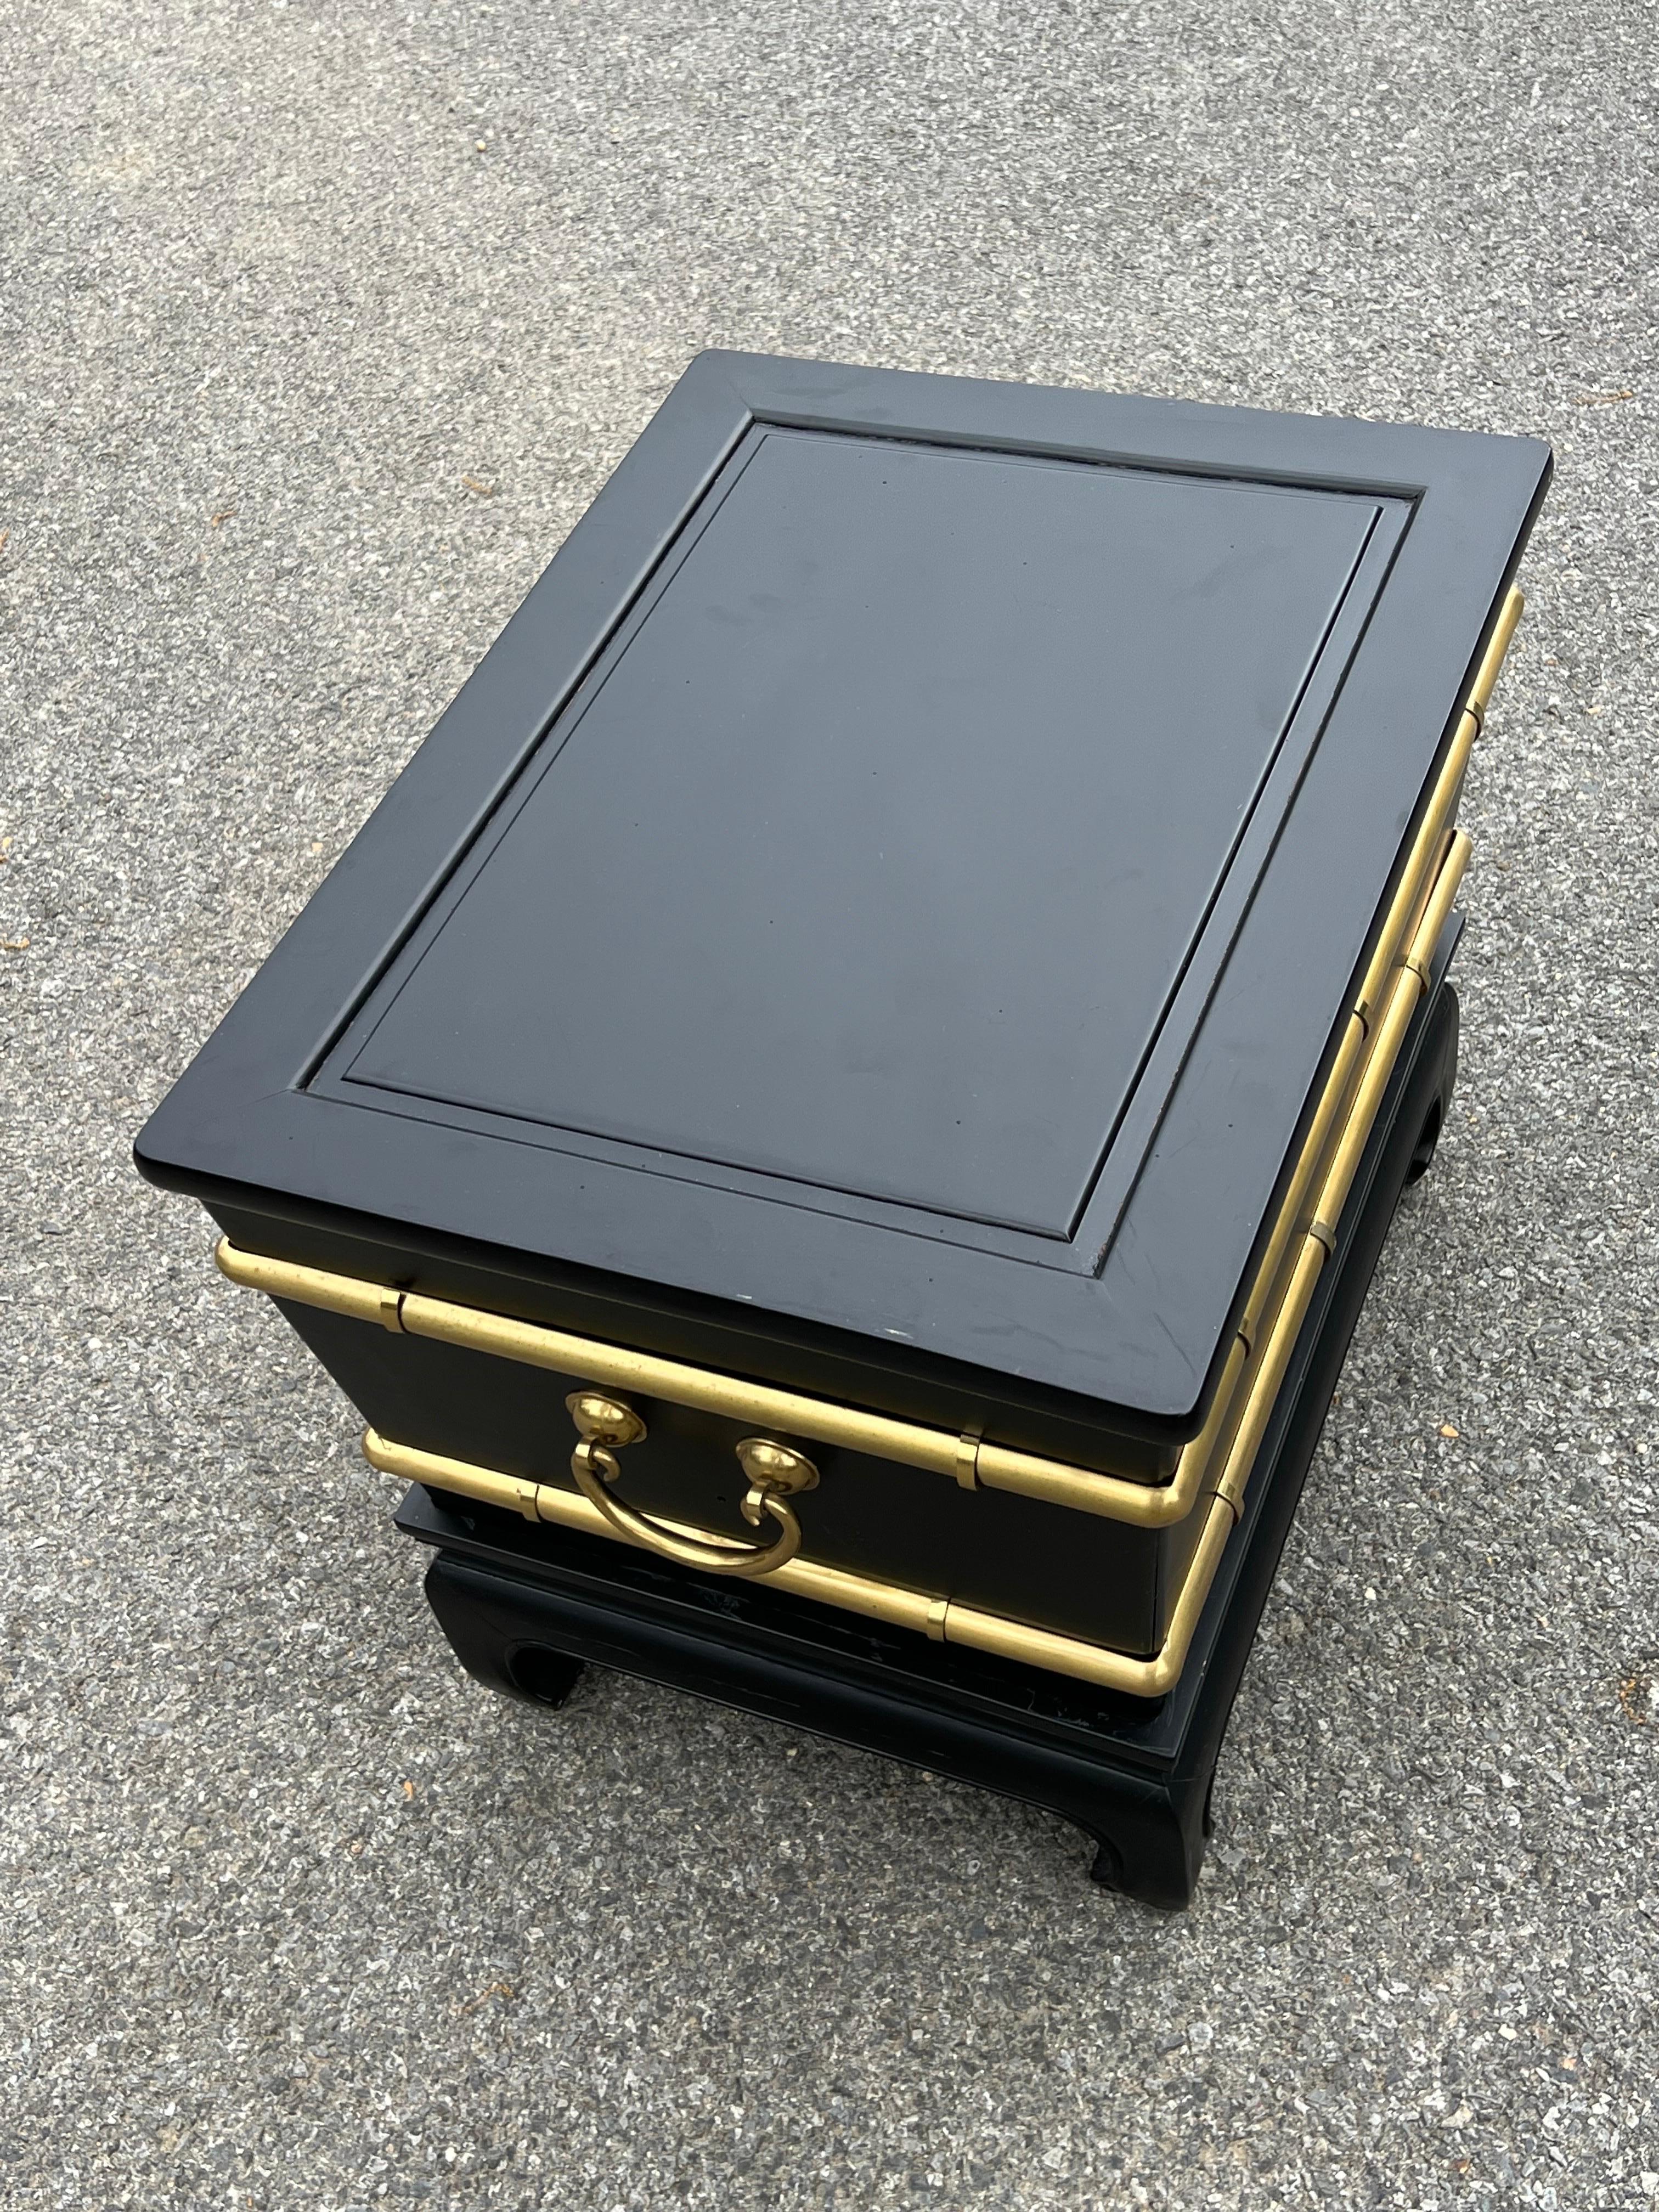 Very unique black ebonized with faux bamboo brass accents side table, single drawer on the side, looks like a chest but top doesn’t open. The base is separate and has beautiful Ming style legs. 
Great Size to be used also as small coffee table.